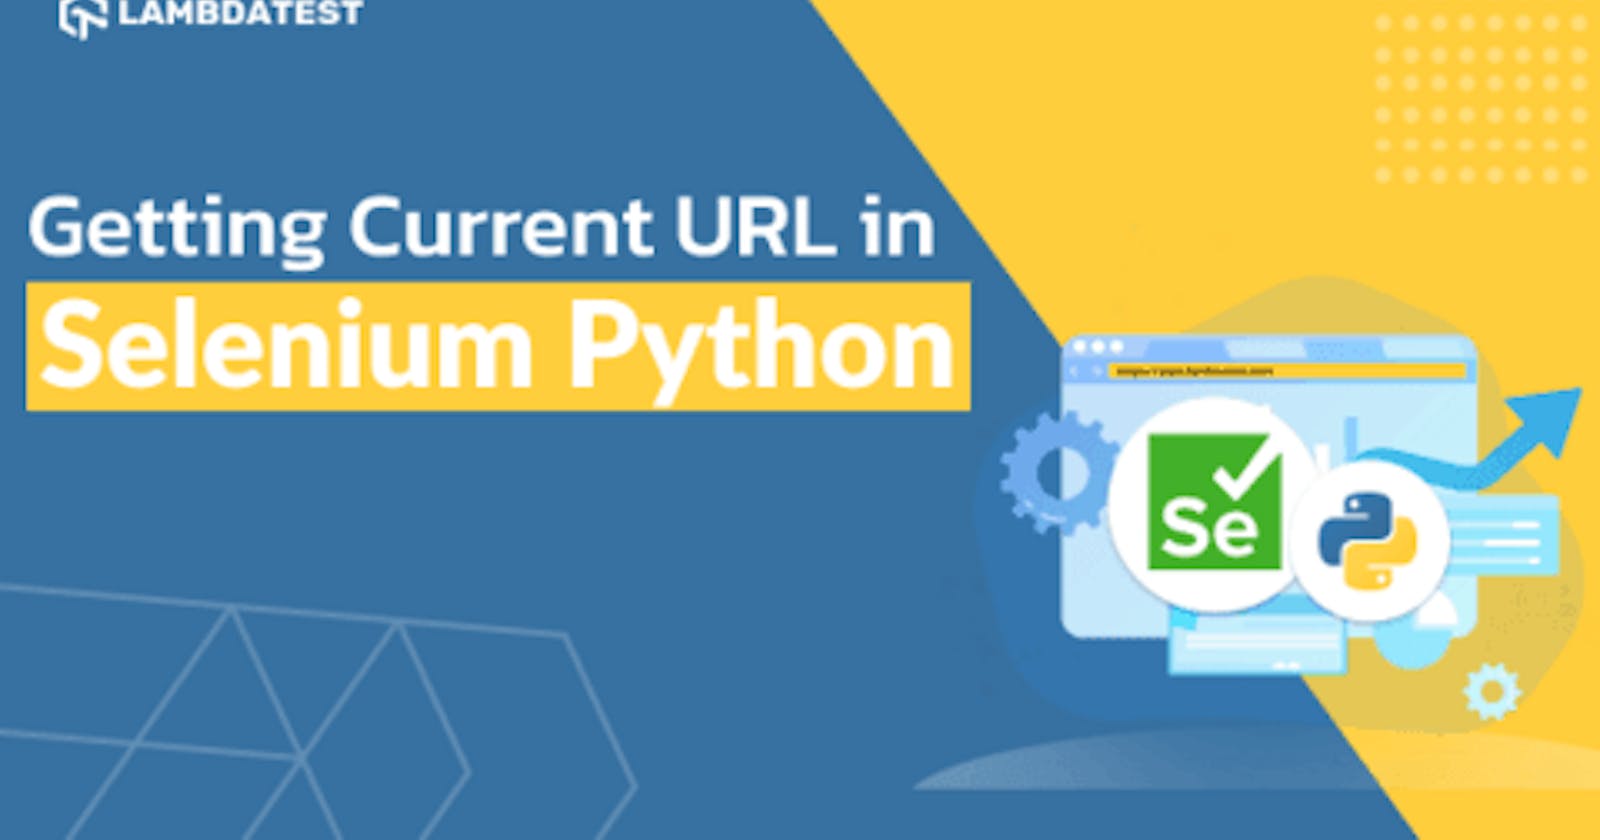 Selenium with Python Tutorial: How to Get Current URL with Python